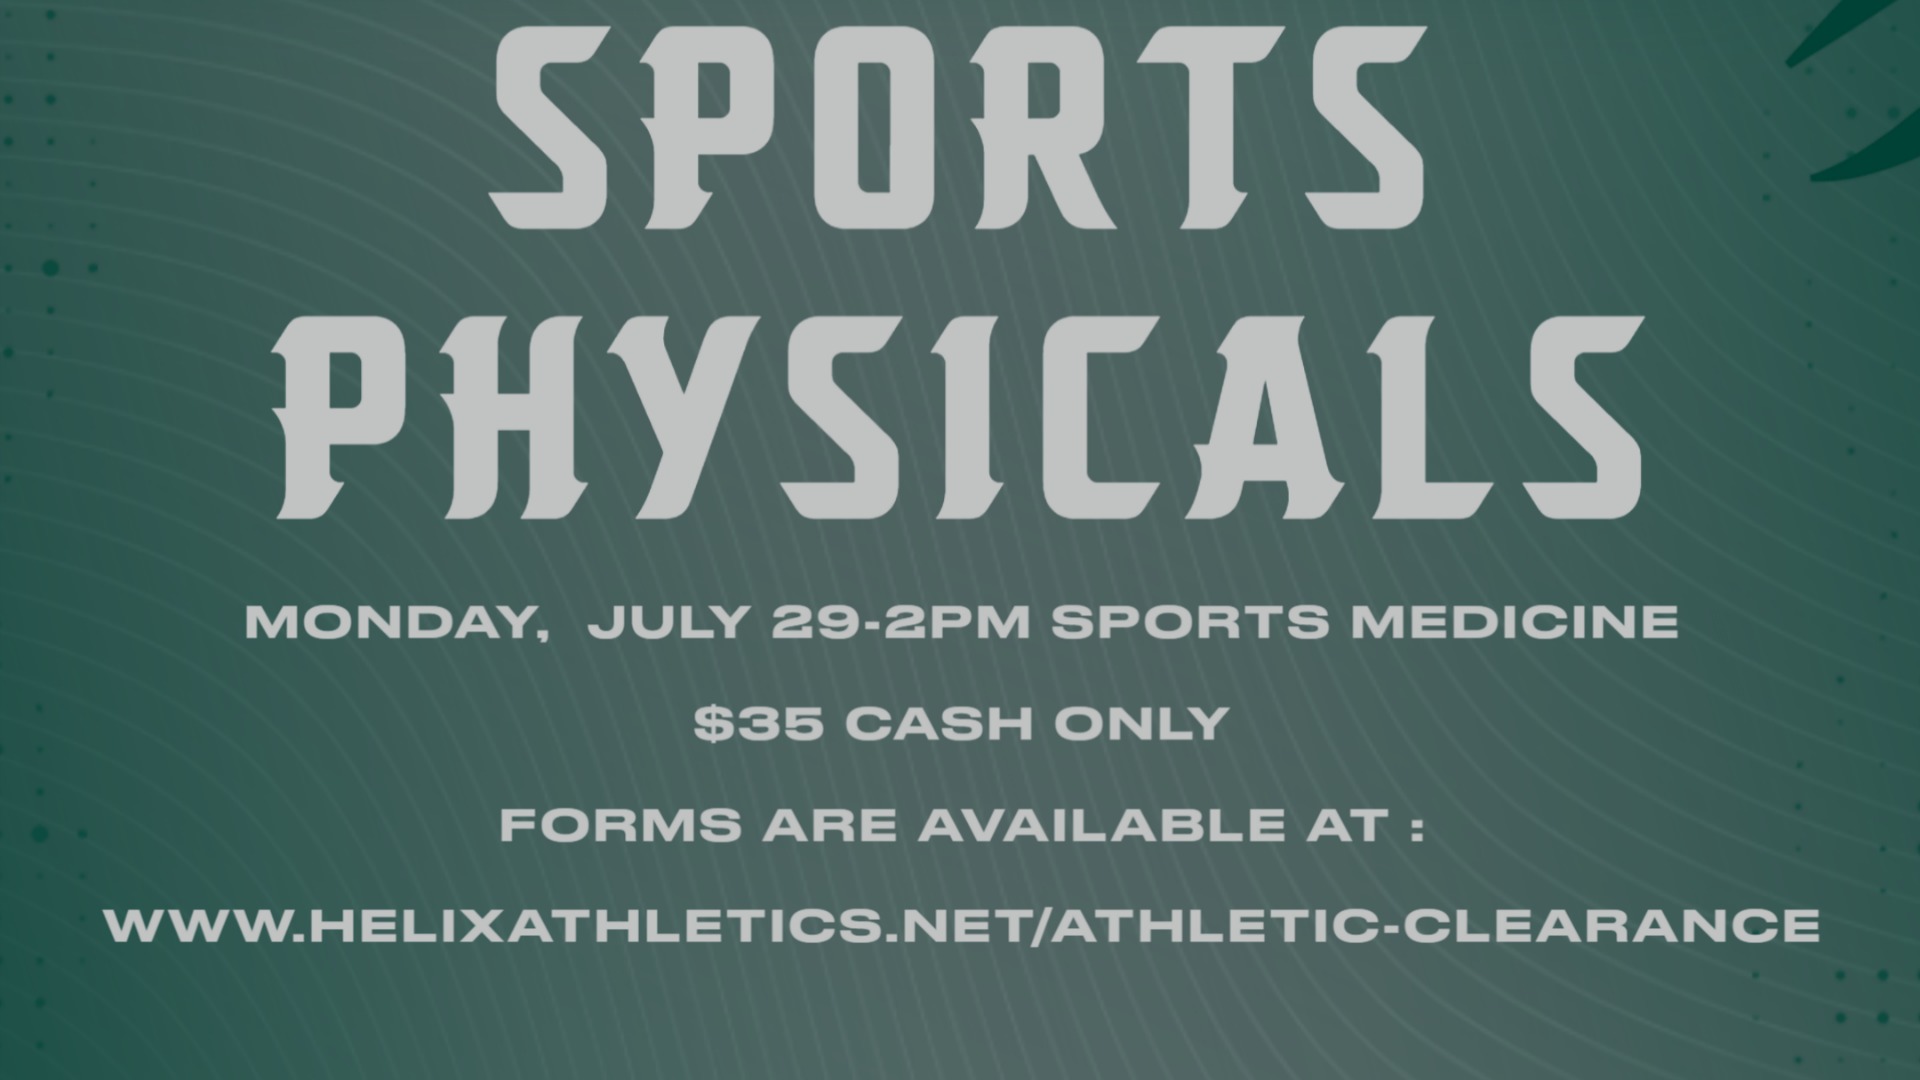 Slide 3 - Fall Sports Physicals Offered on Monday, July 29